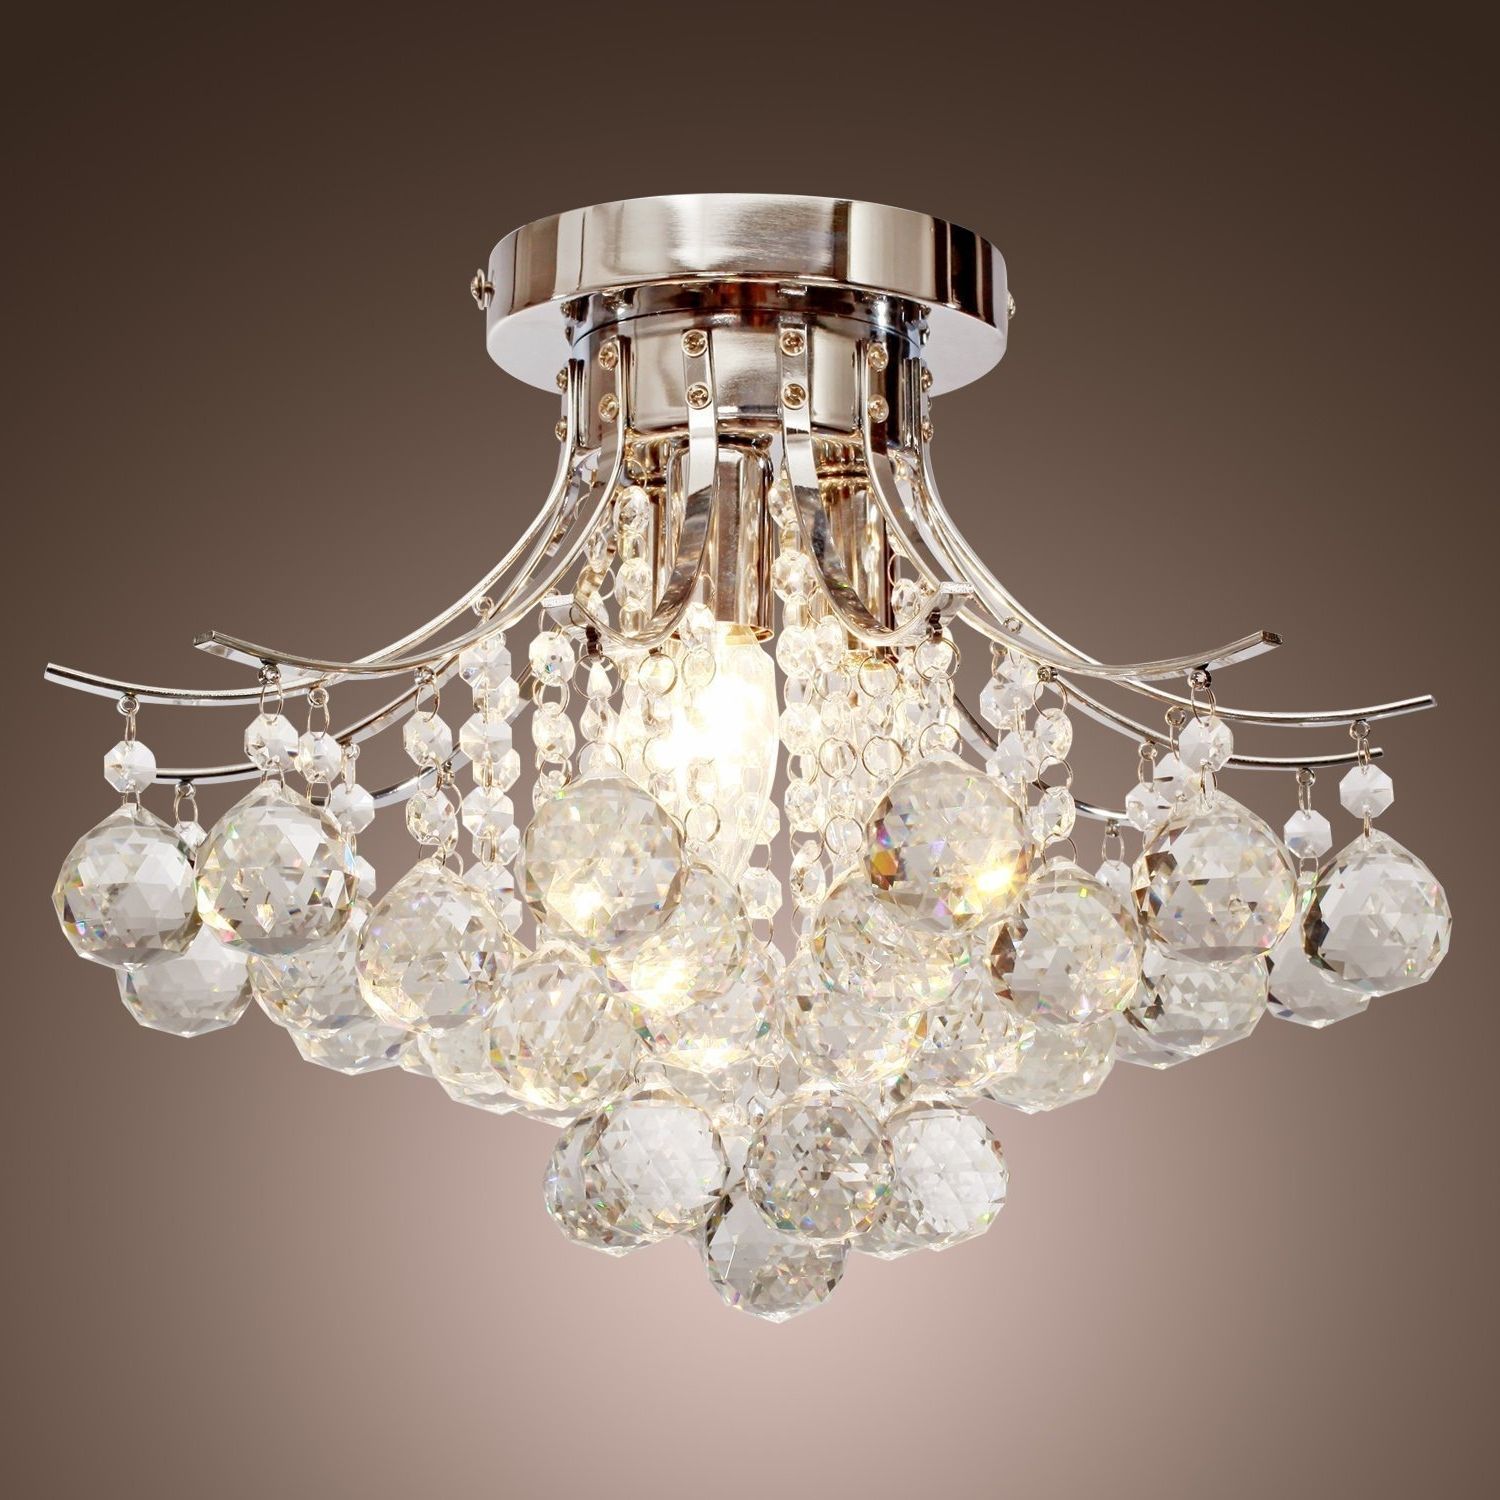 Locoâ Chrome Finish Crystal Chandelier With 3 Lights, Mini Style Intended For Well Known Small Chrome Chandelier (View 12 of 15)